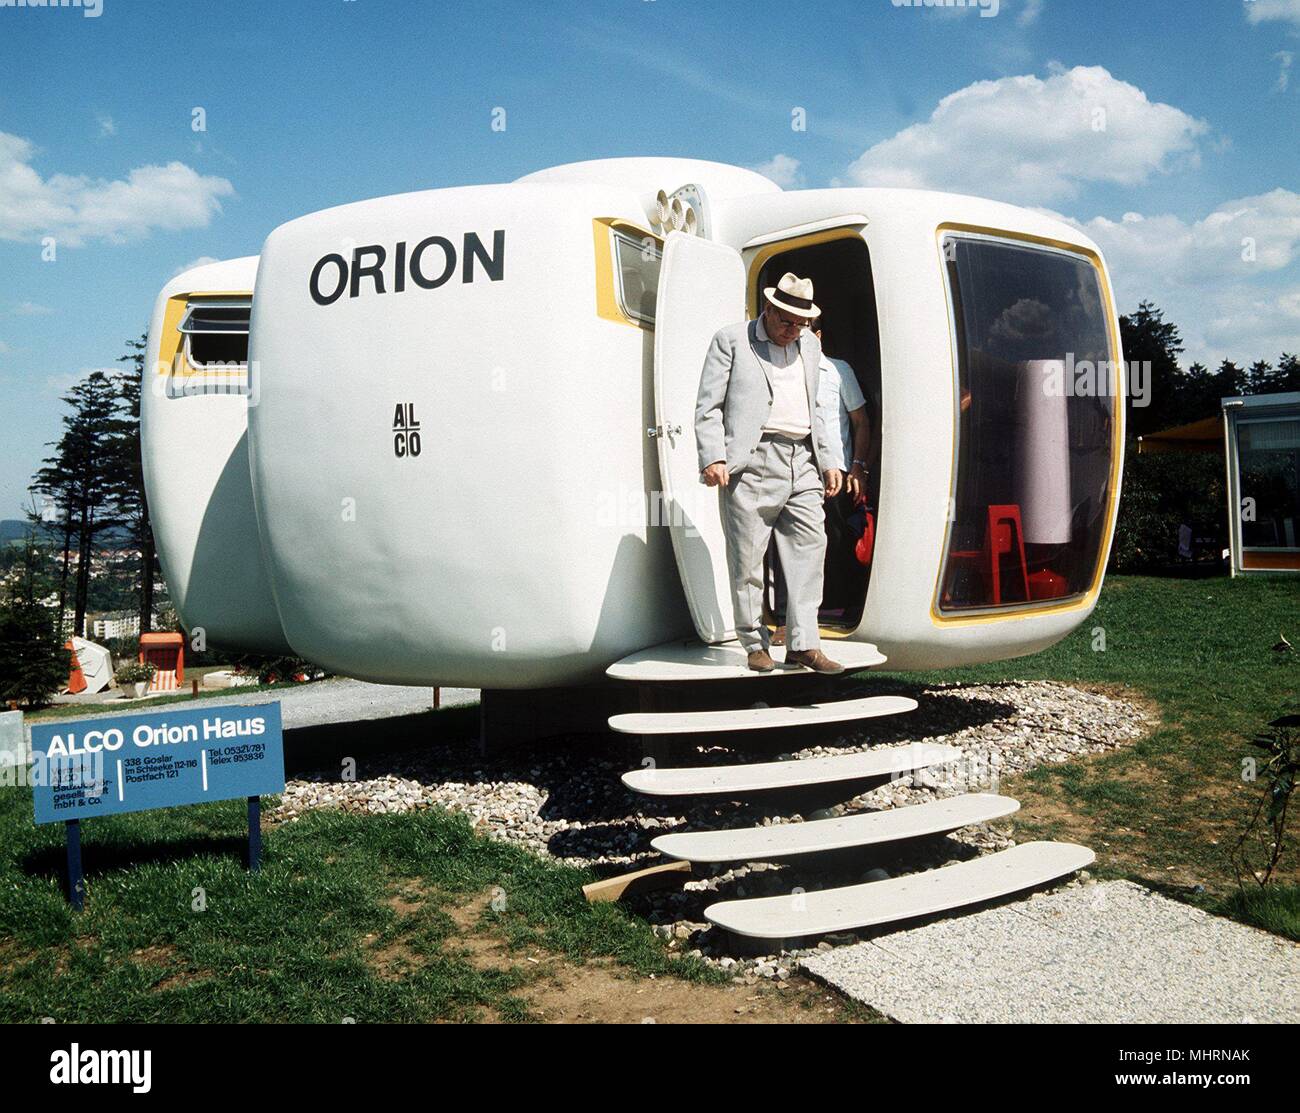 The Plastic House Orion From The Building Supply Company Alco